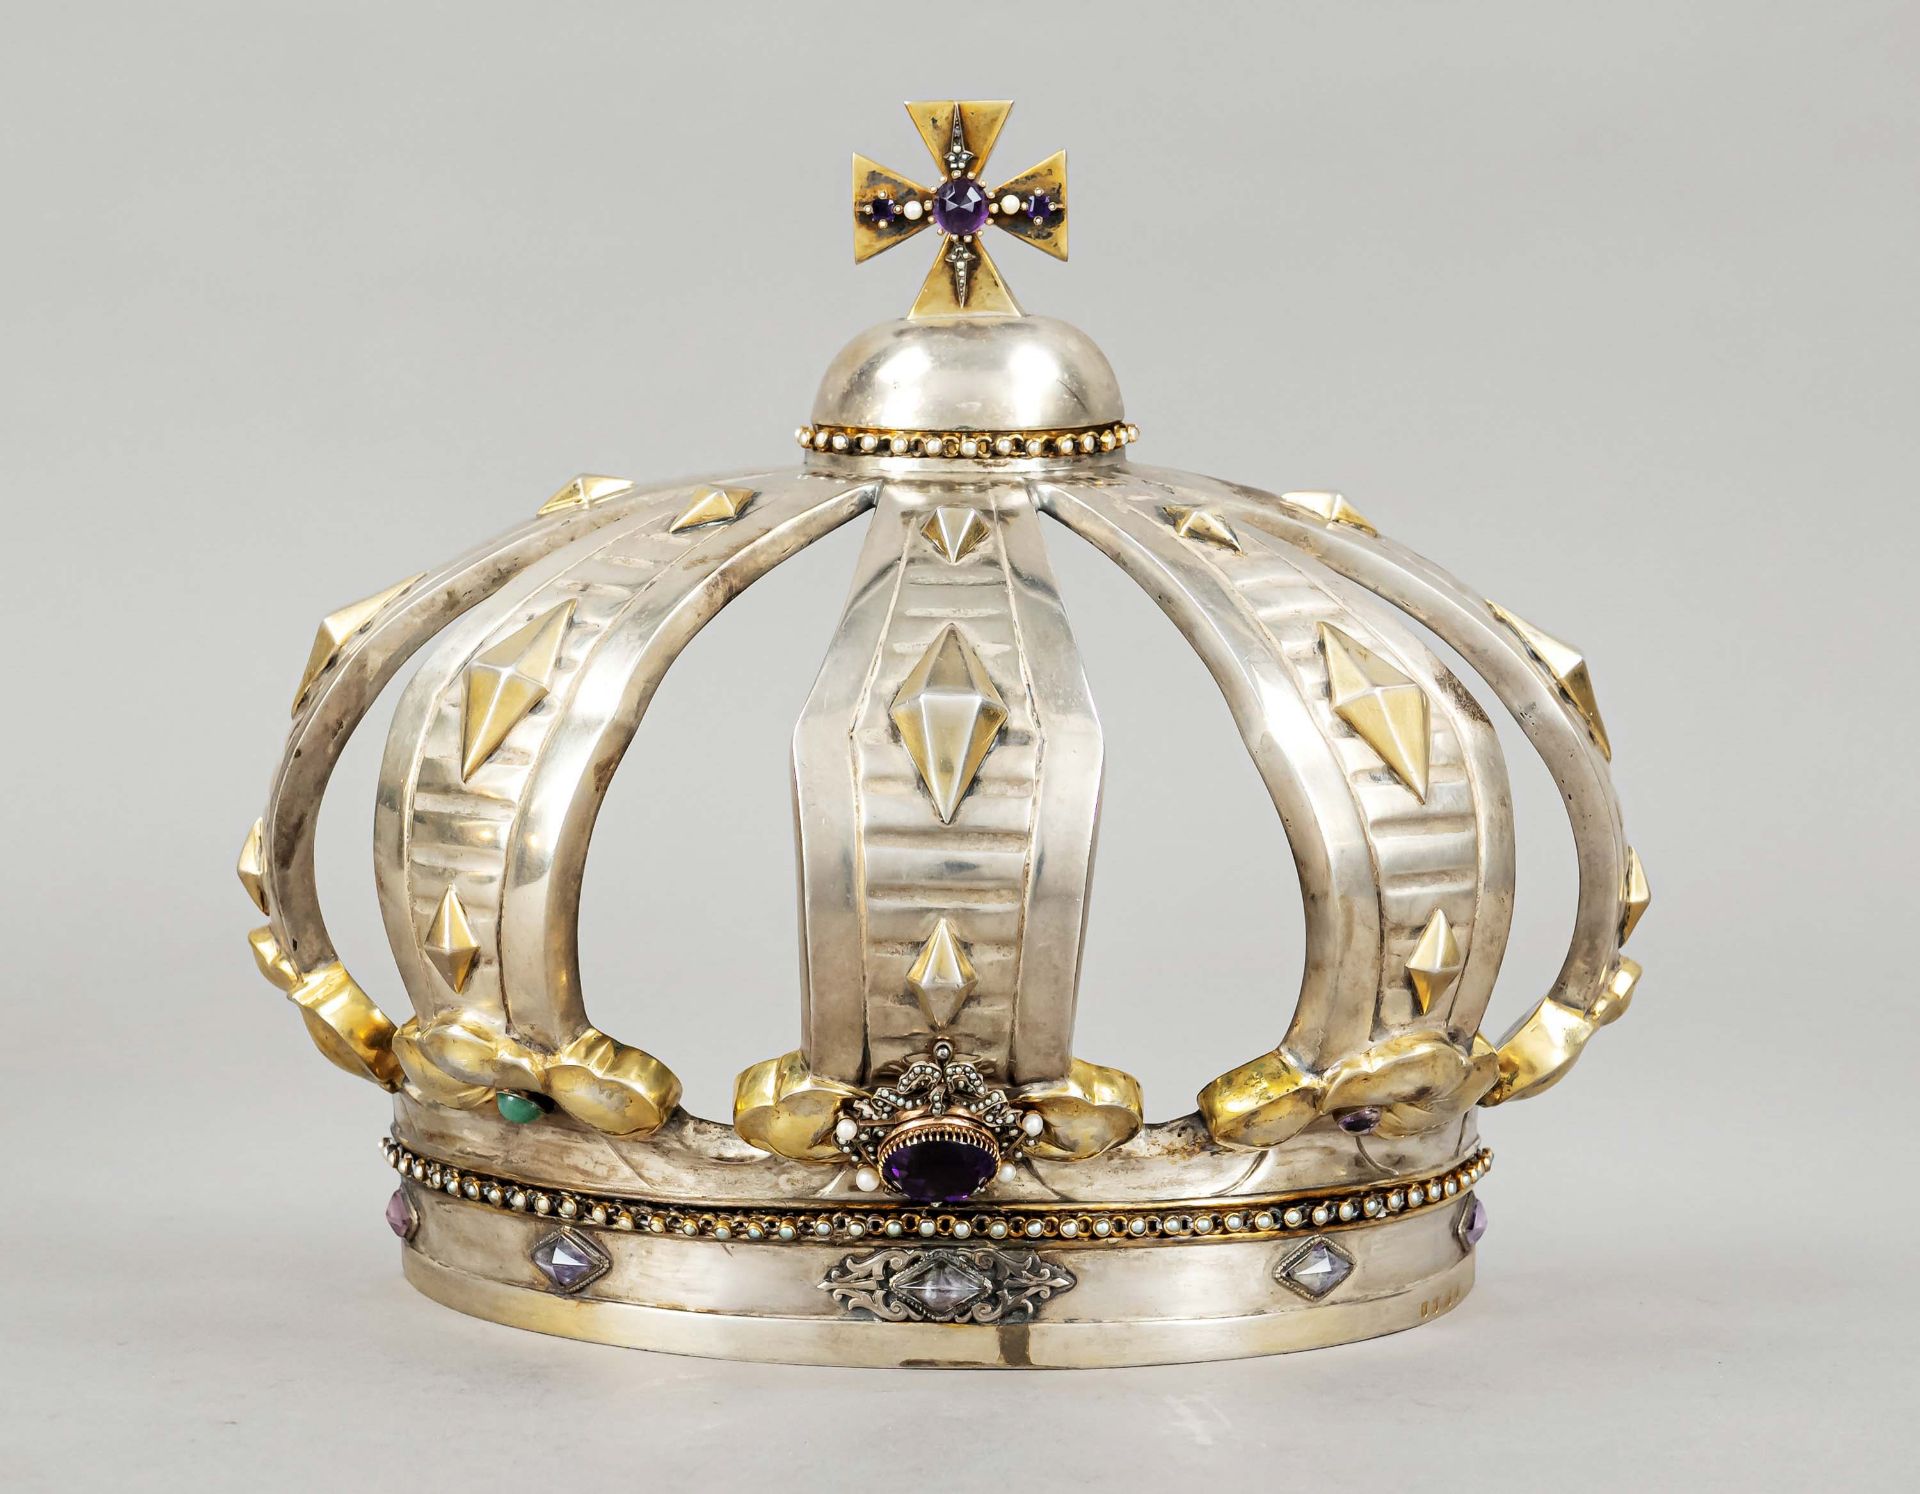 Wall decoration in the shape of a crown, German, around 1900, maker's mark Bruckmann & Söhne,